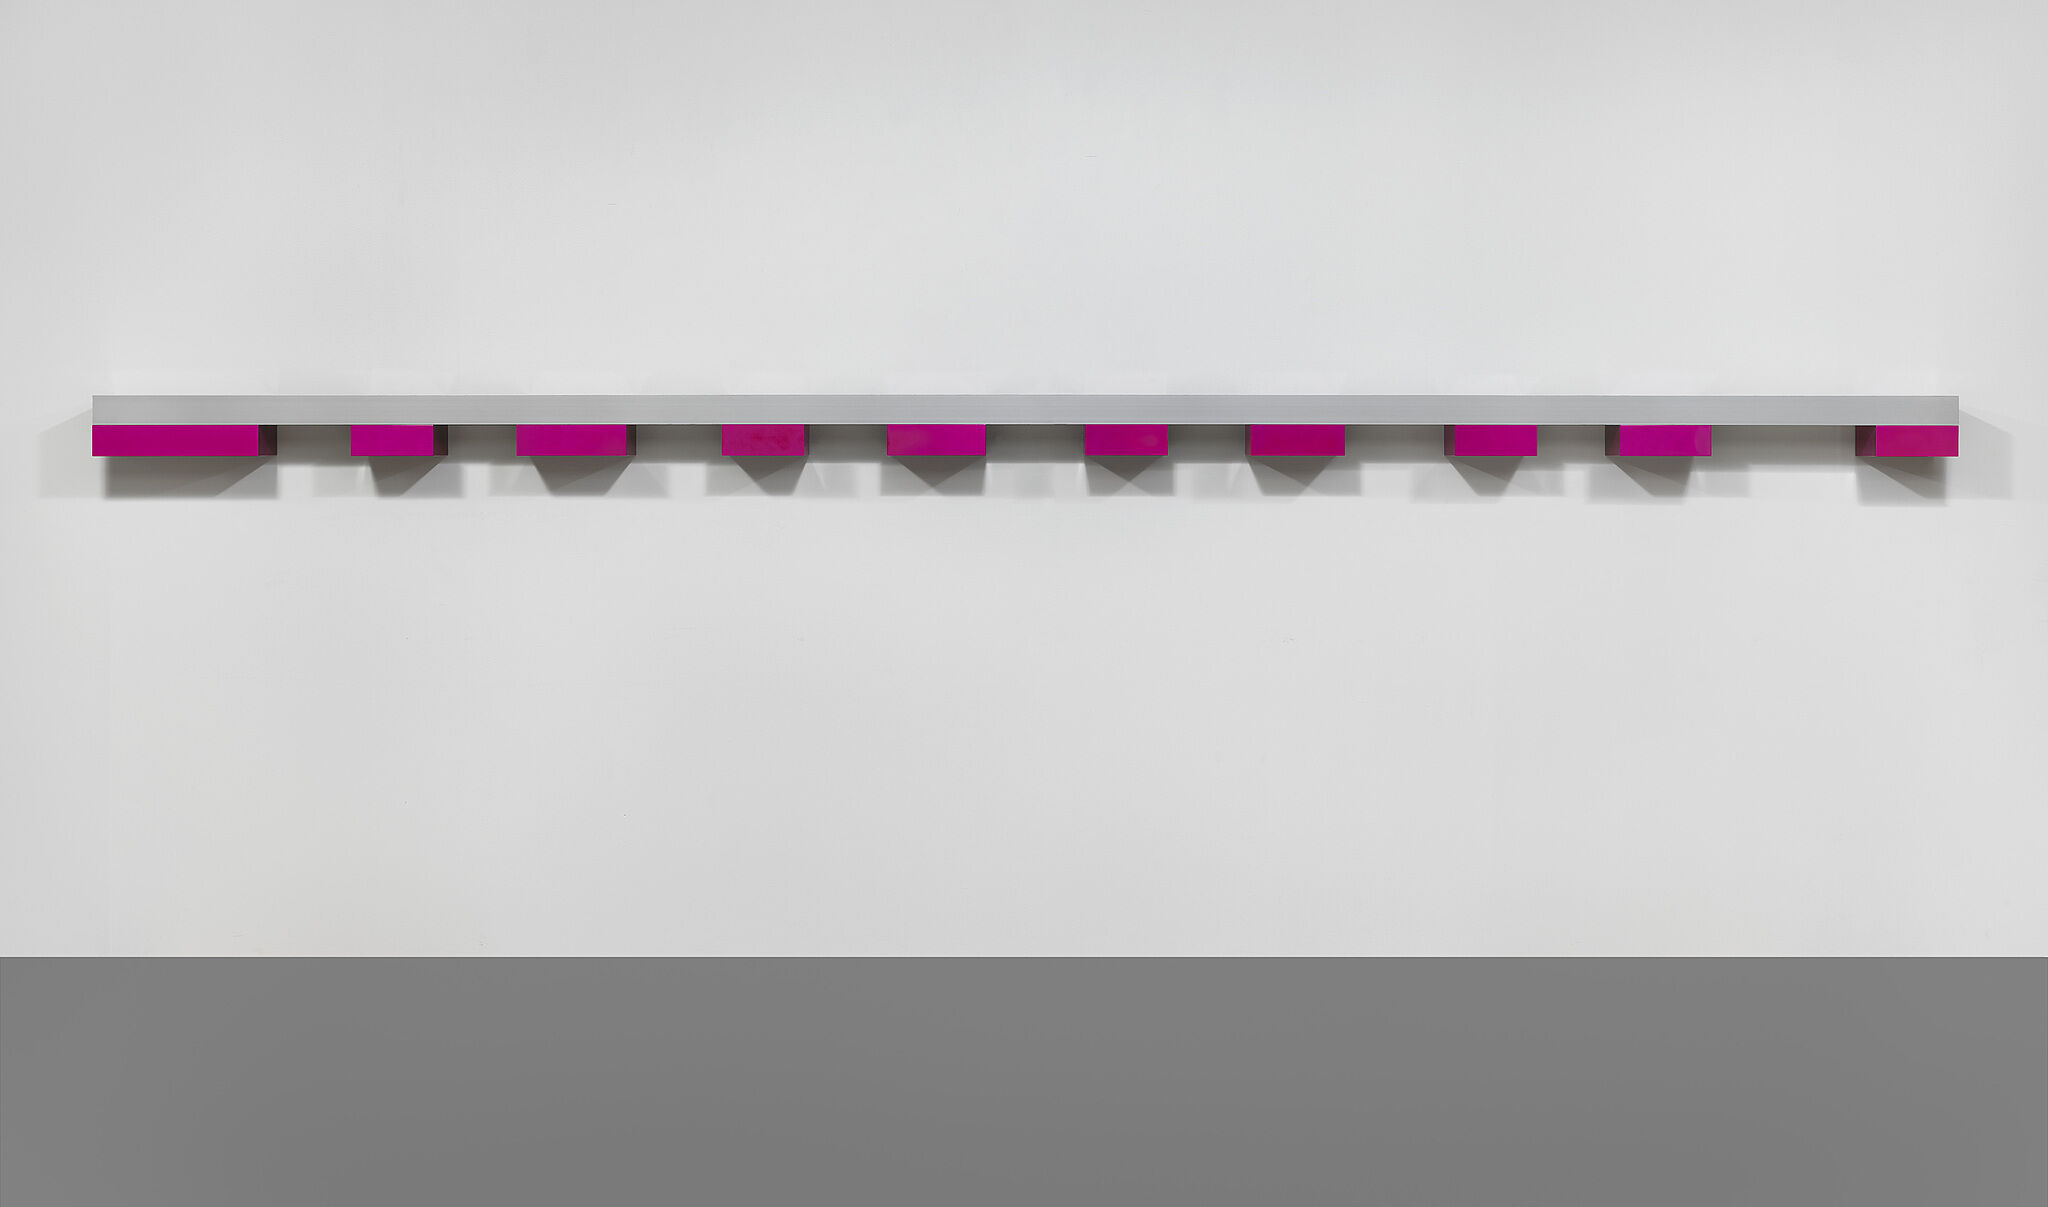 A horizontal sculpture made of pink metal boxes hanging on a wall.